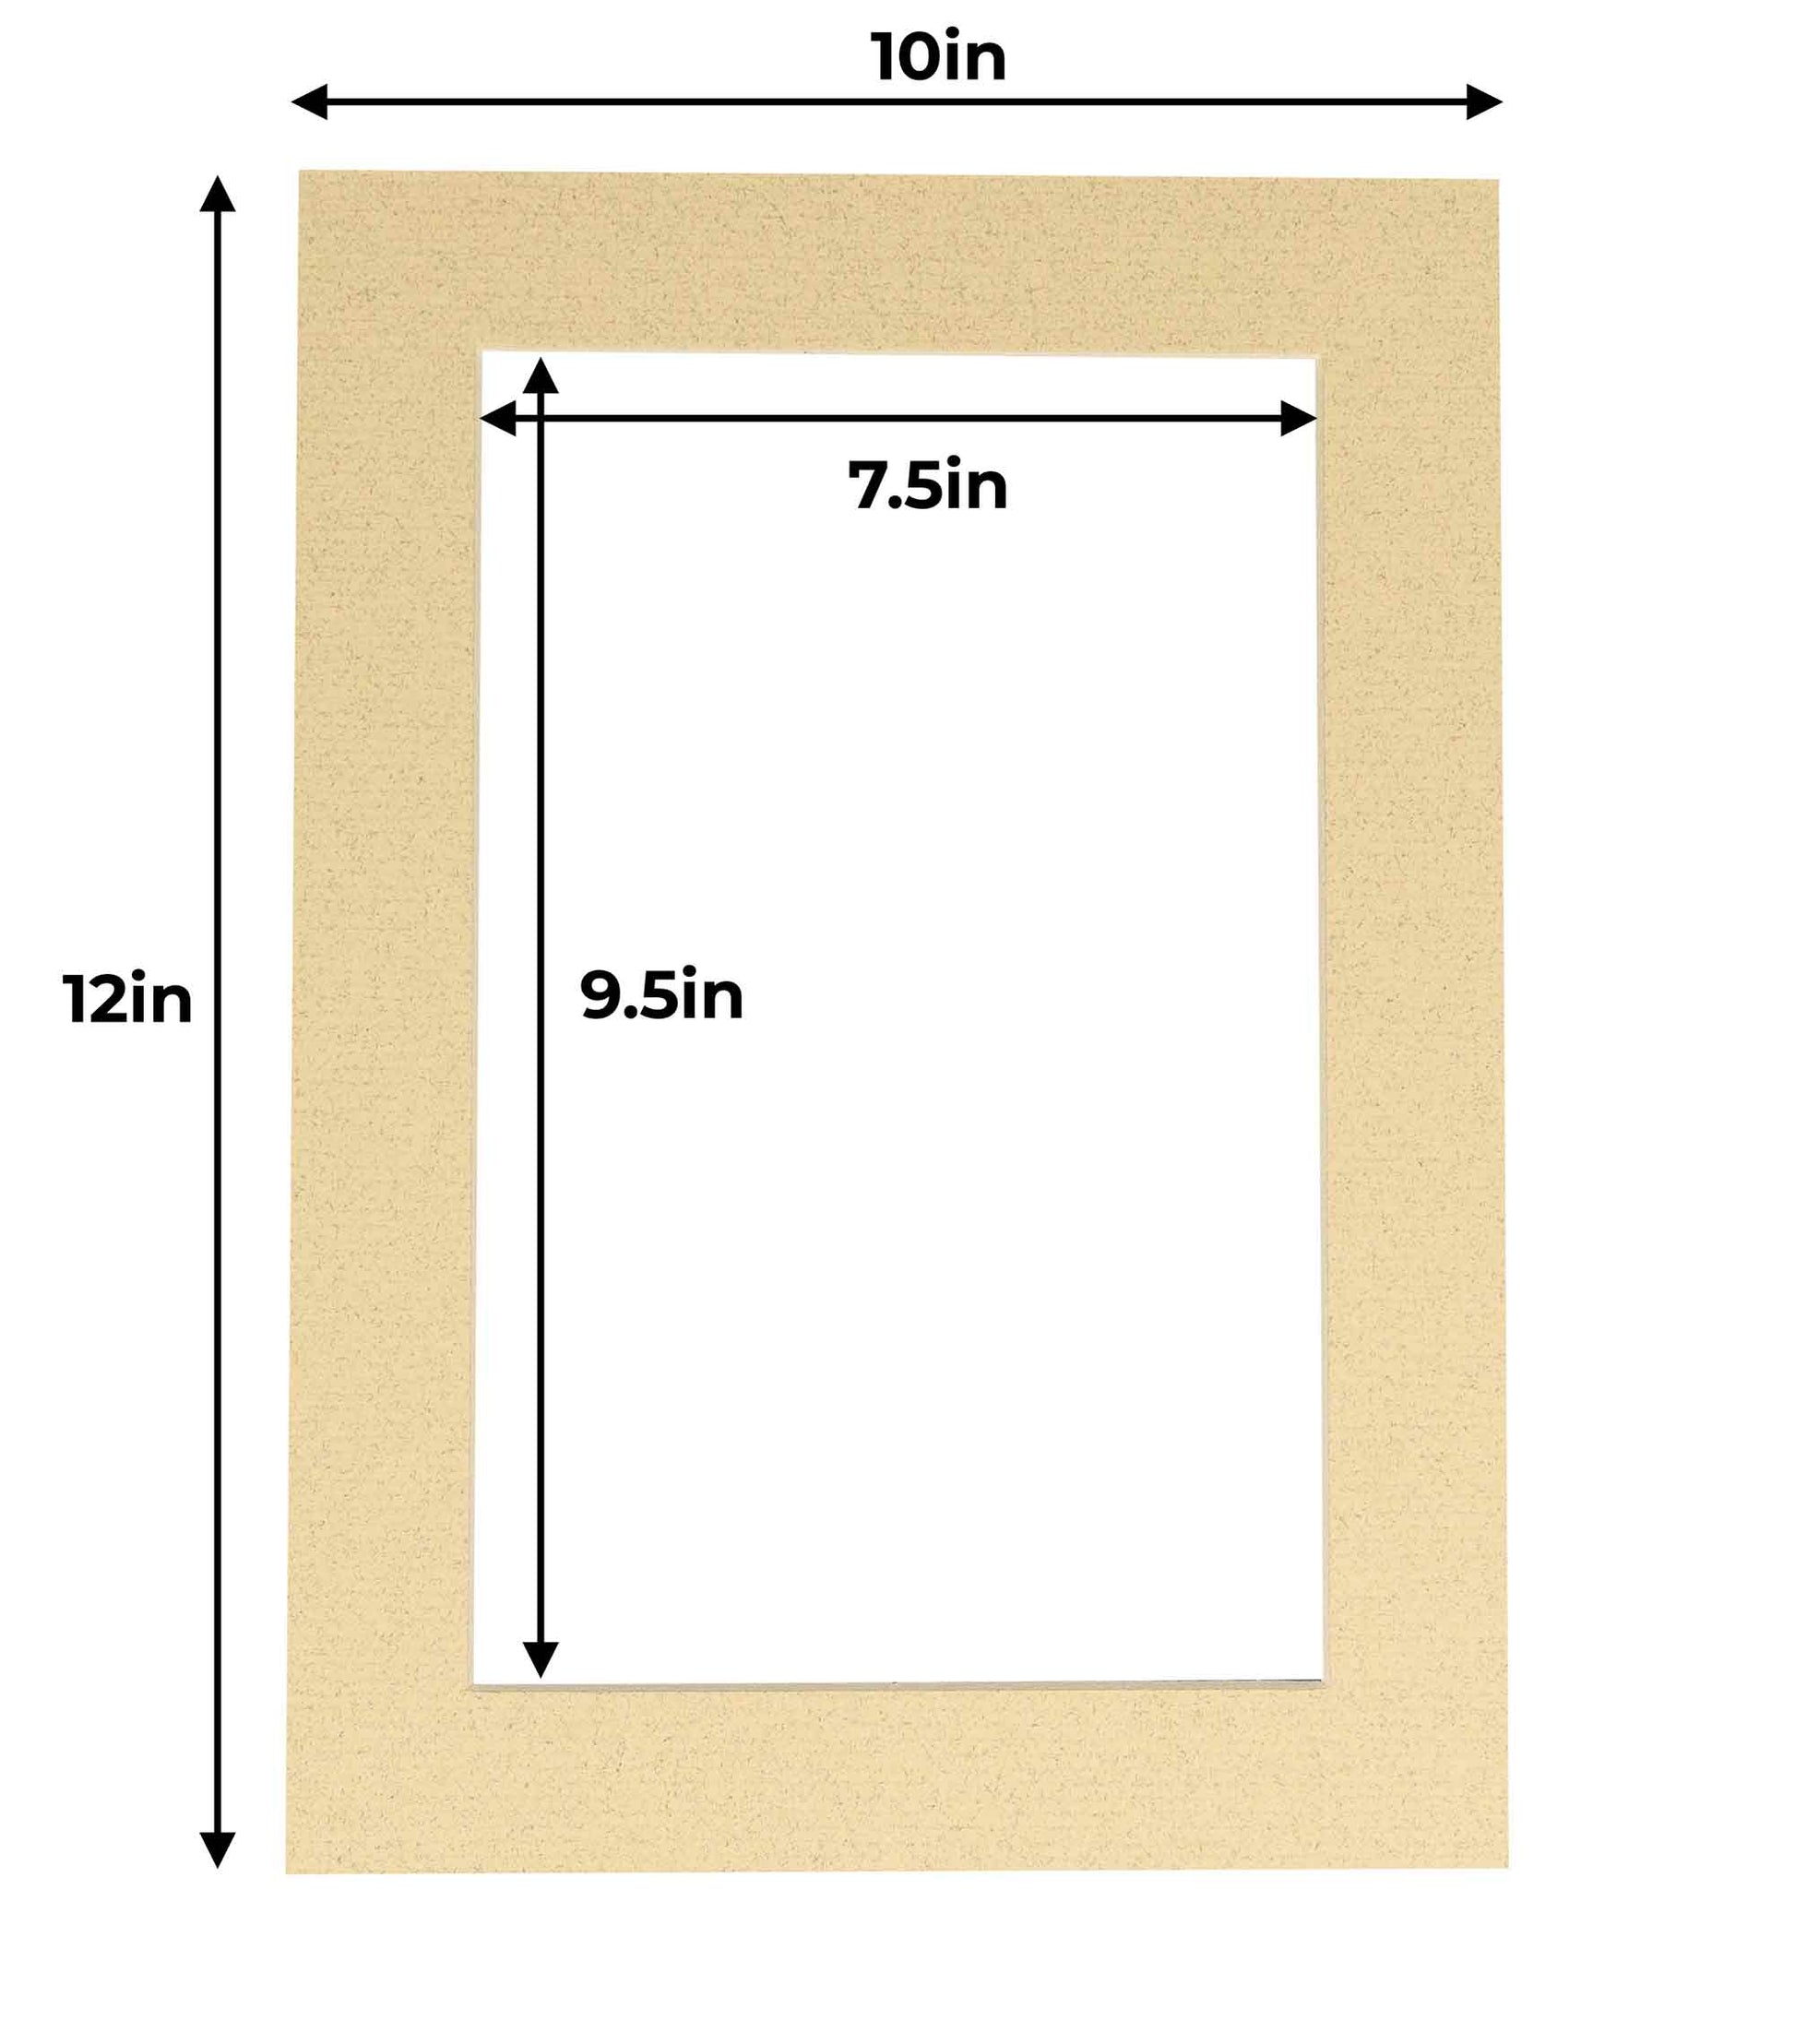  8x10 Mat for 16x20 Frame - Precut Mat Board Acid-Free White  8x10 Photo Matte Made to Fit a 16x20 Picture Frame, Premium Matboard for  Family Photos, Show Kits, Art, Picture Framing, Pack of 10 Mats